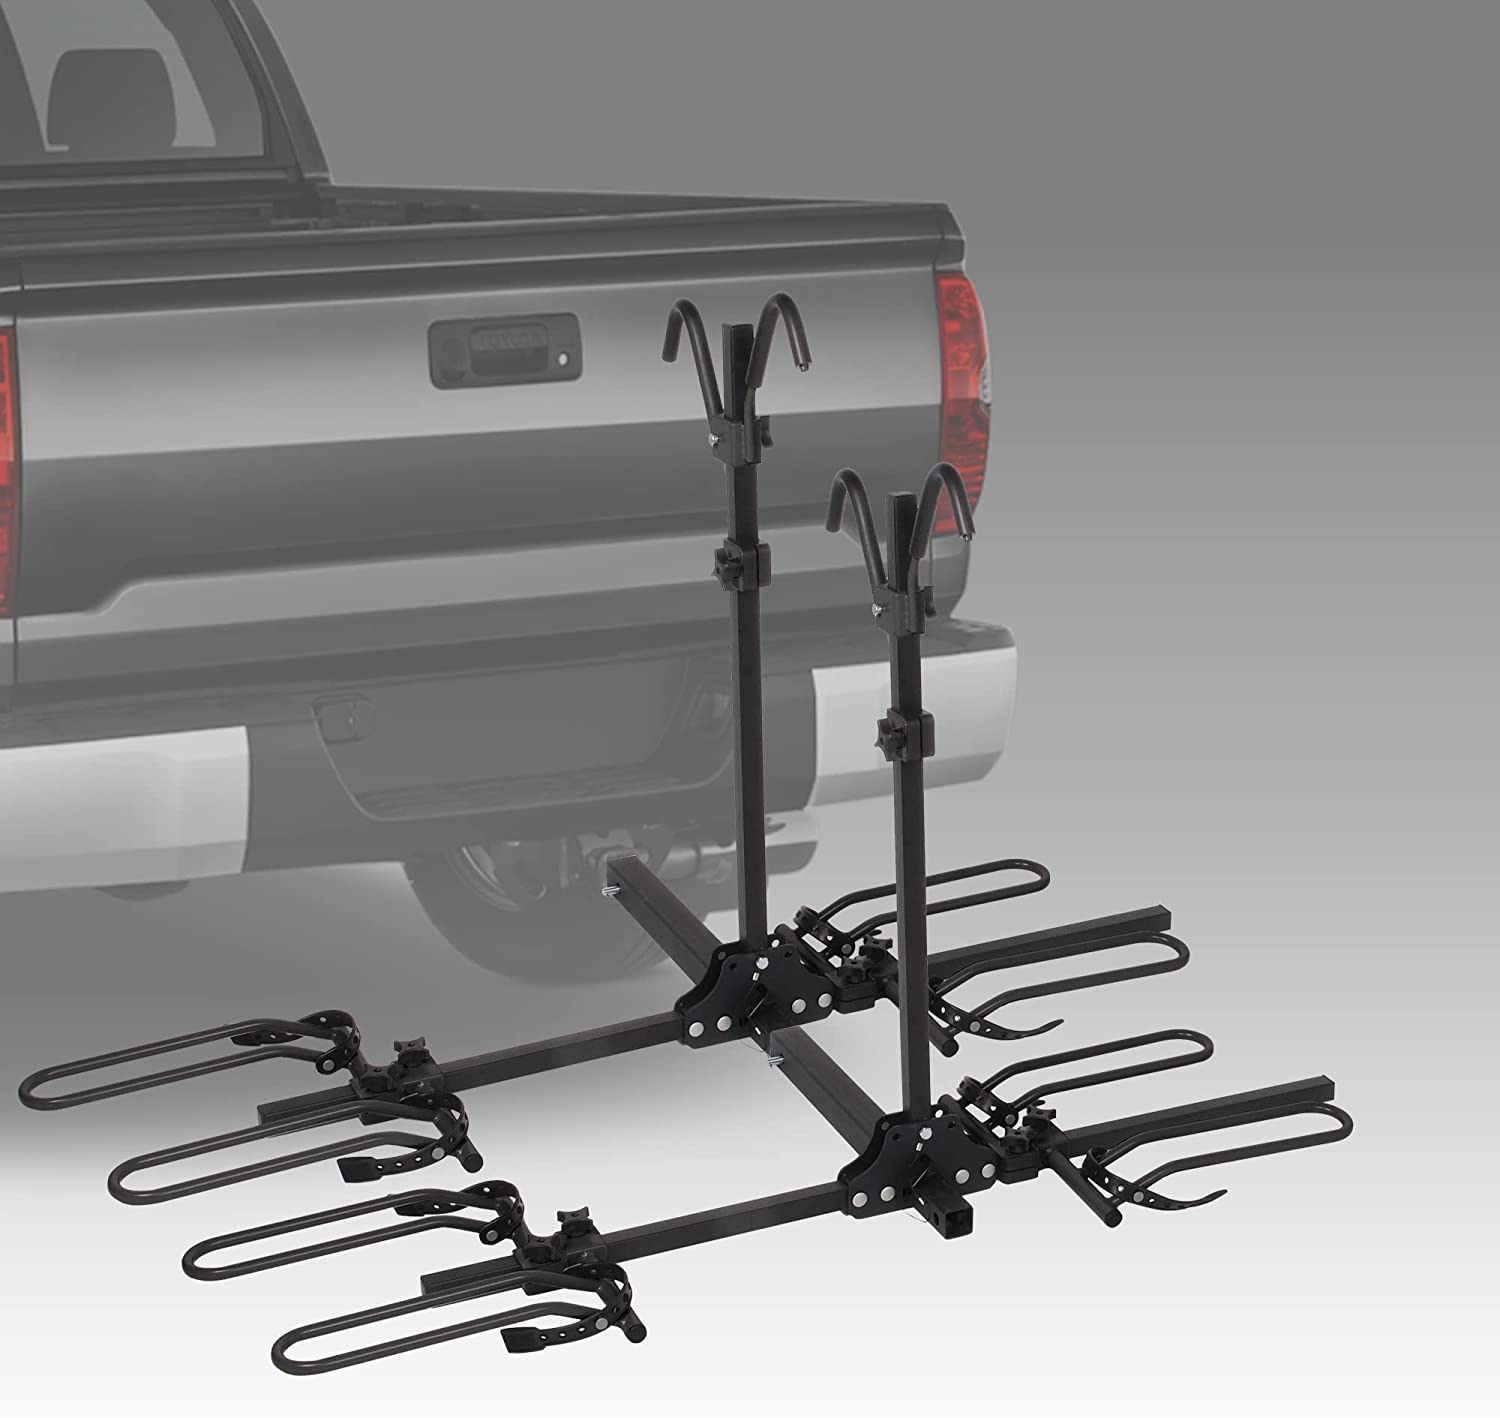 Hitch Mounted Bike Rack Bicycle Platform Style Carrier with 2" Hitch Receiver for Cars Trucks SUVs Minivans